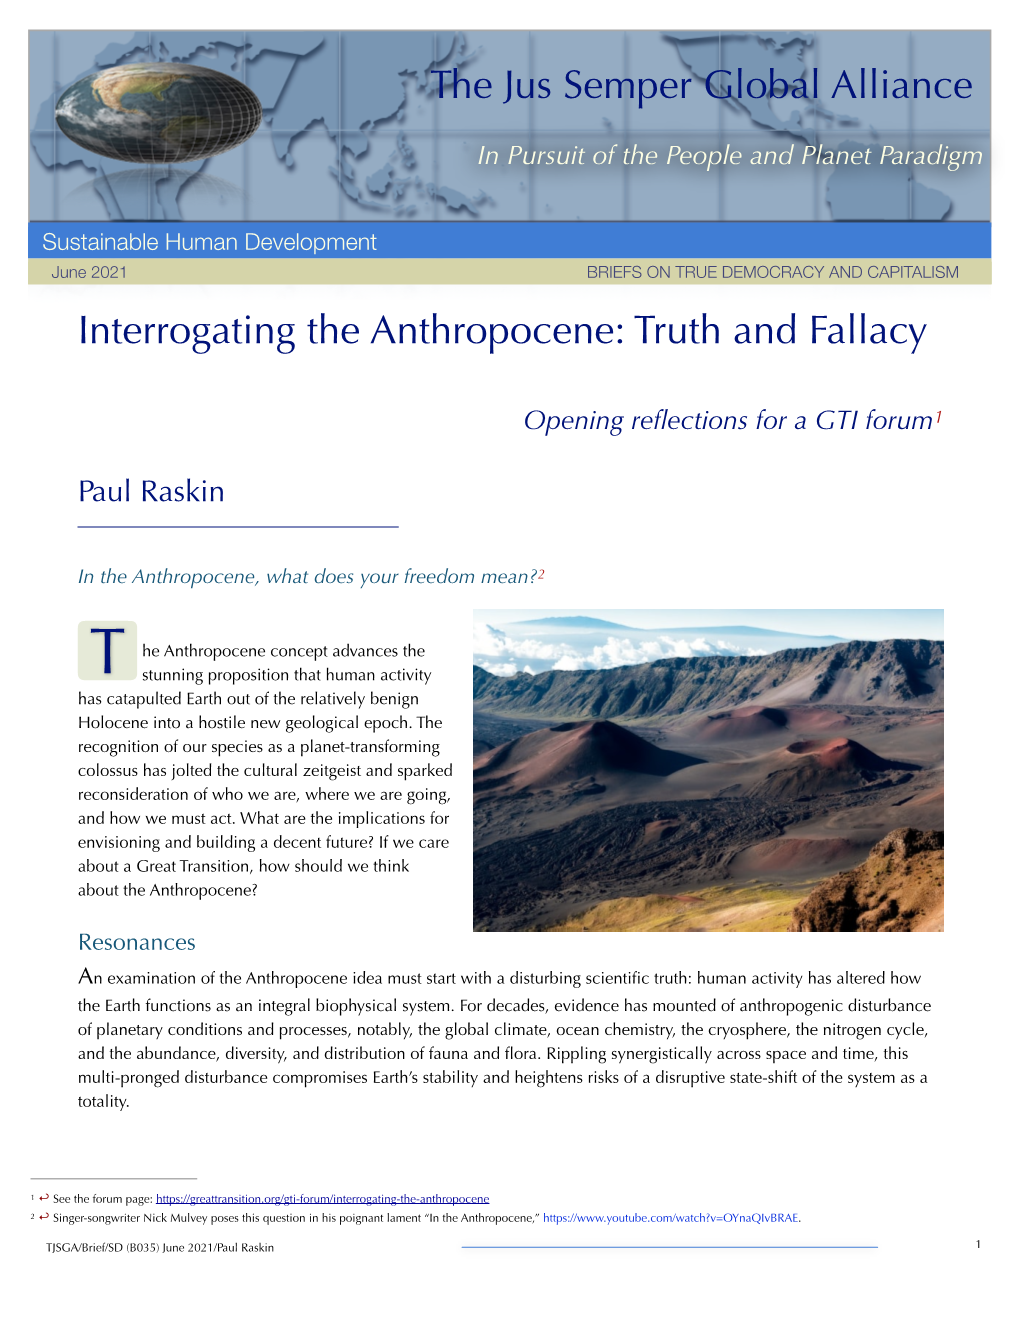 Interrogating the Anthropocene: Truth and Fallacy the Jus Semper Global Alliance